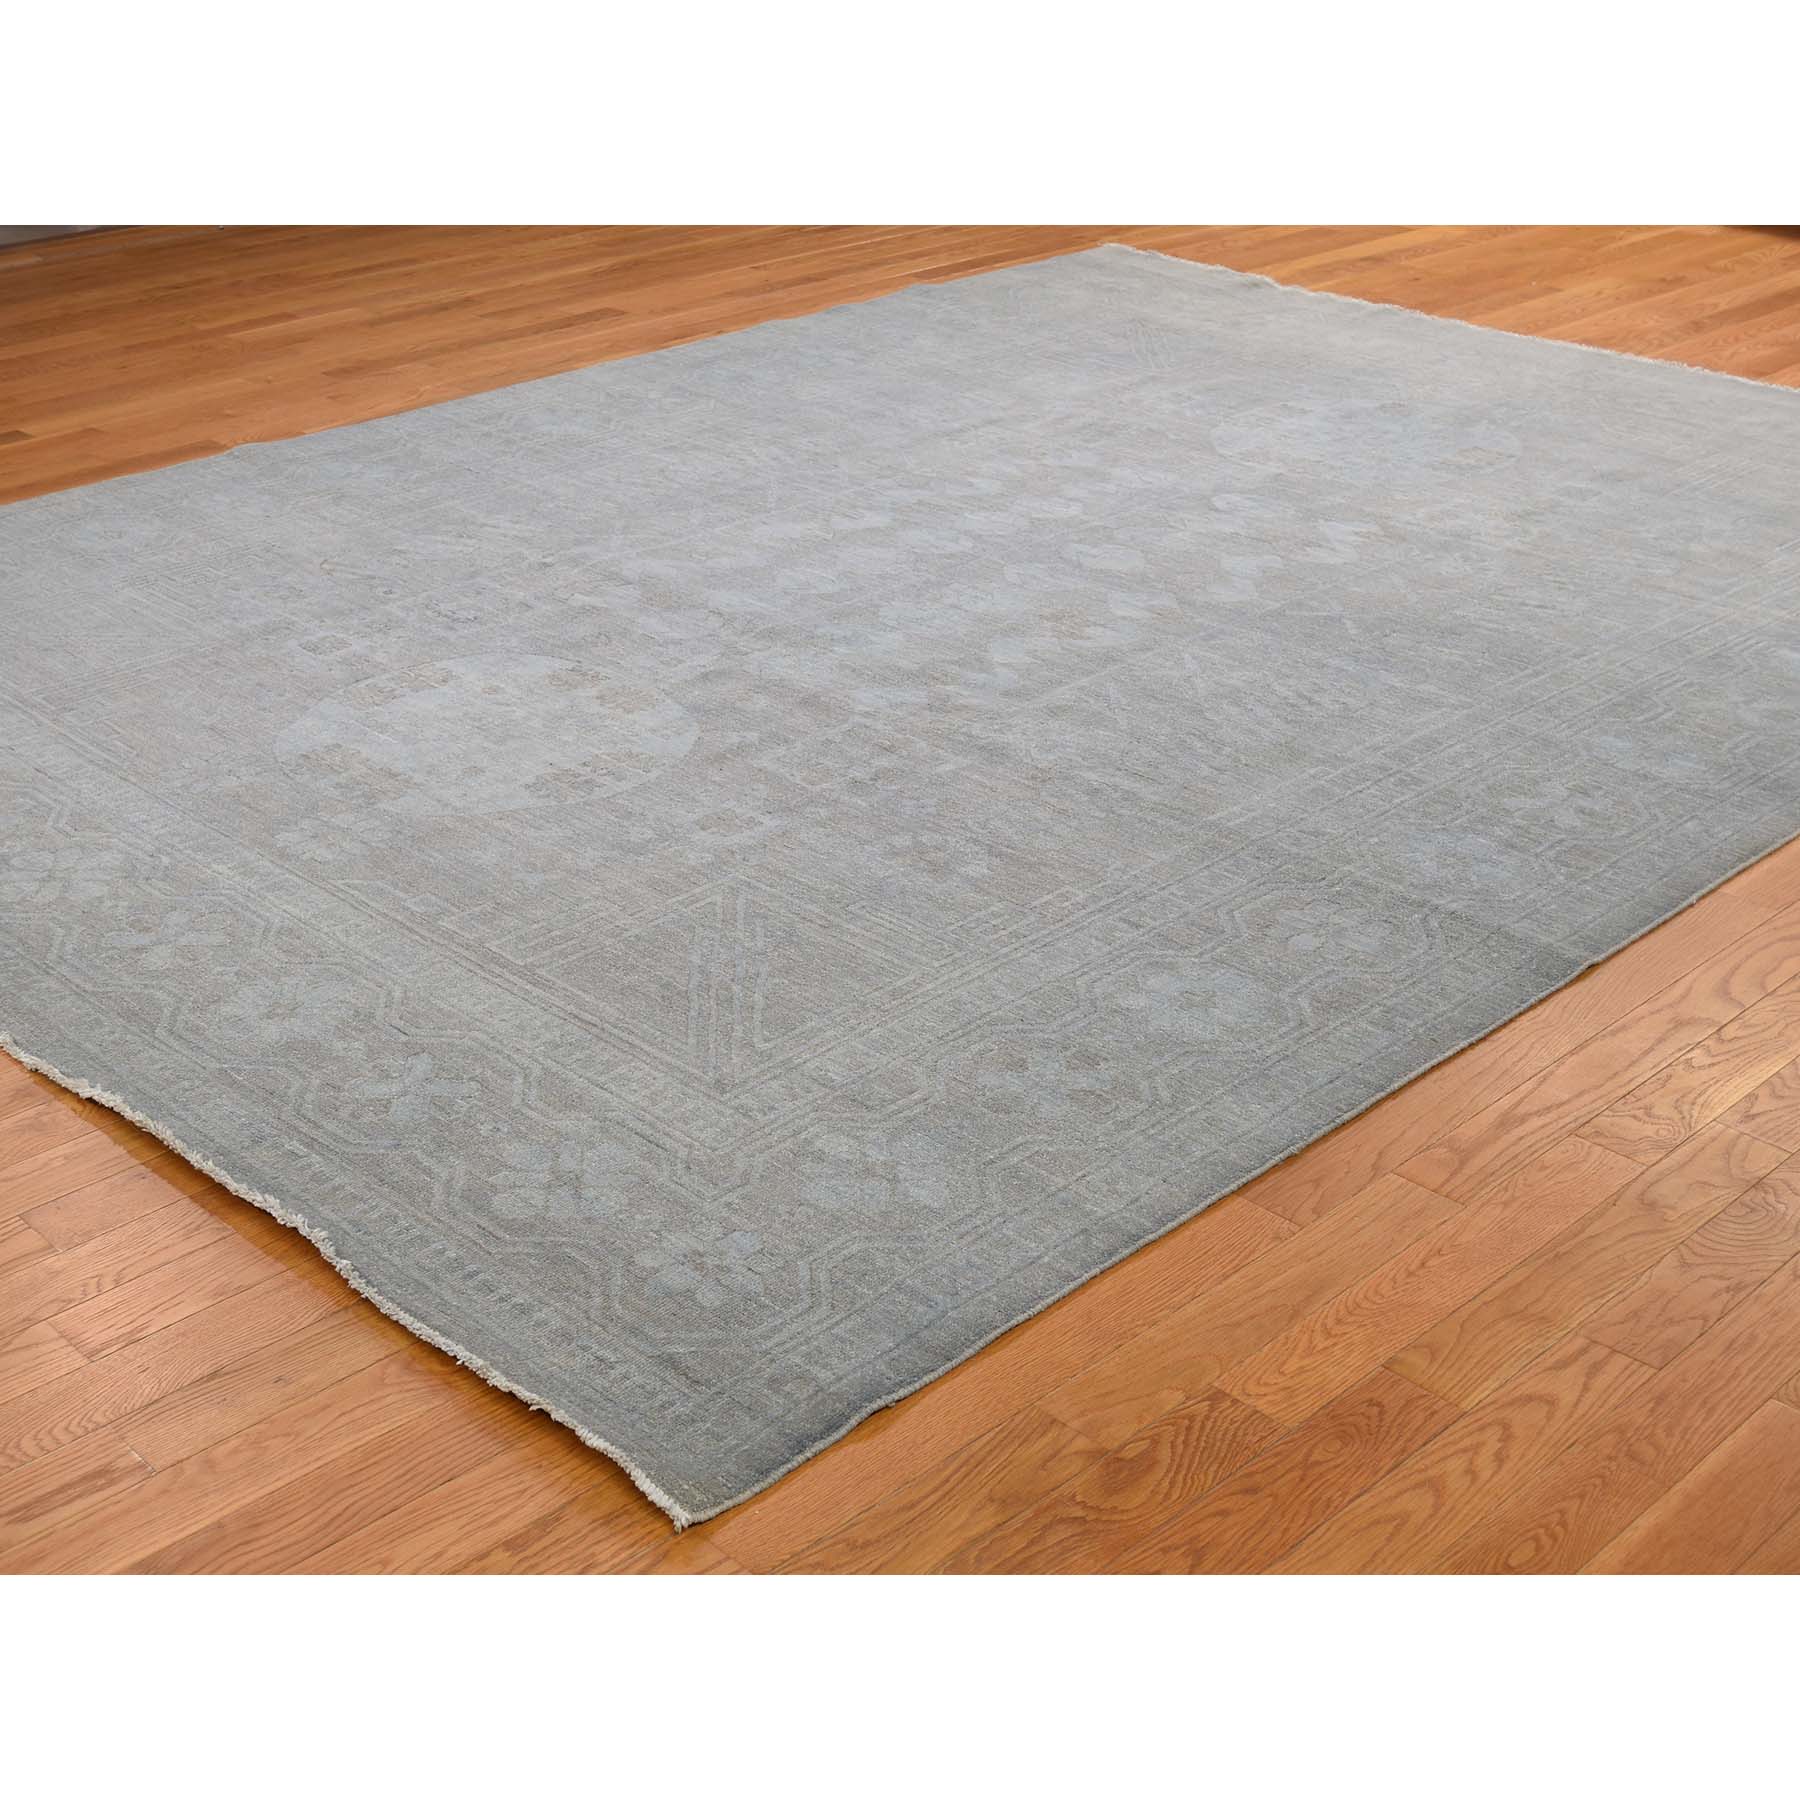 9-x11-7  Pure Wool Overdyed Silver Washed Khotan Hand-Knotted Oriental Rug 